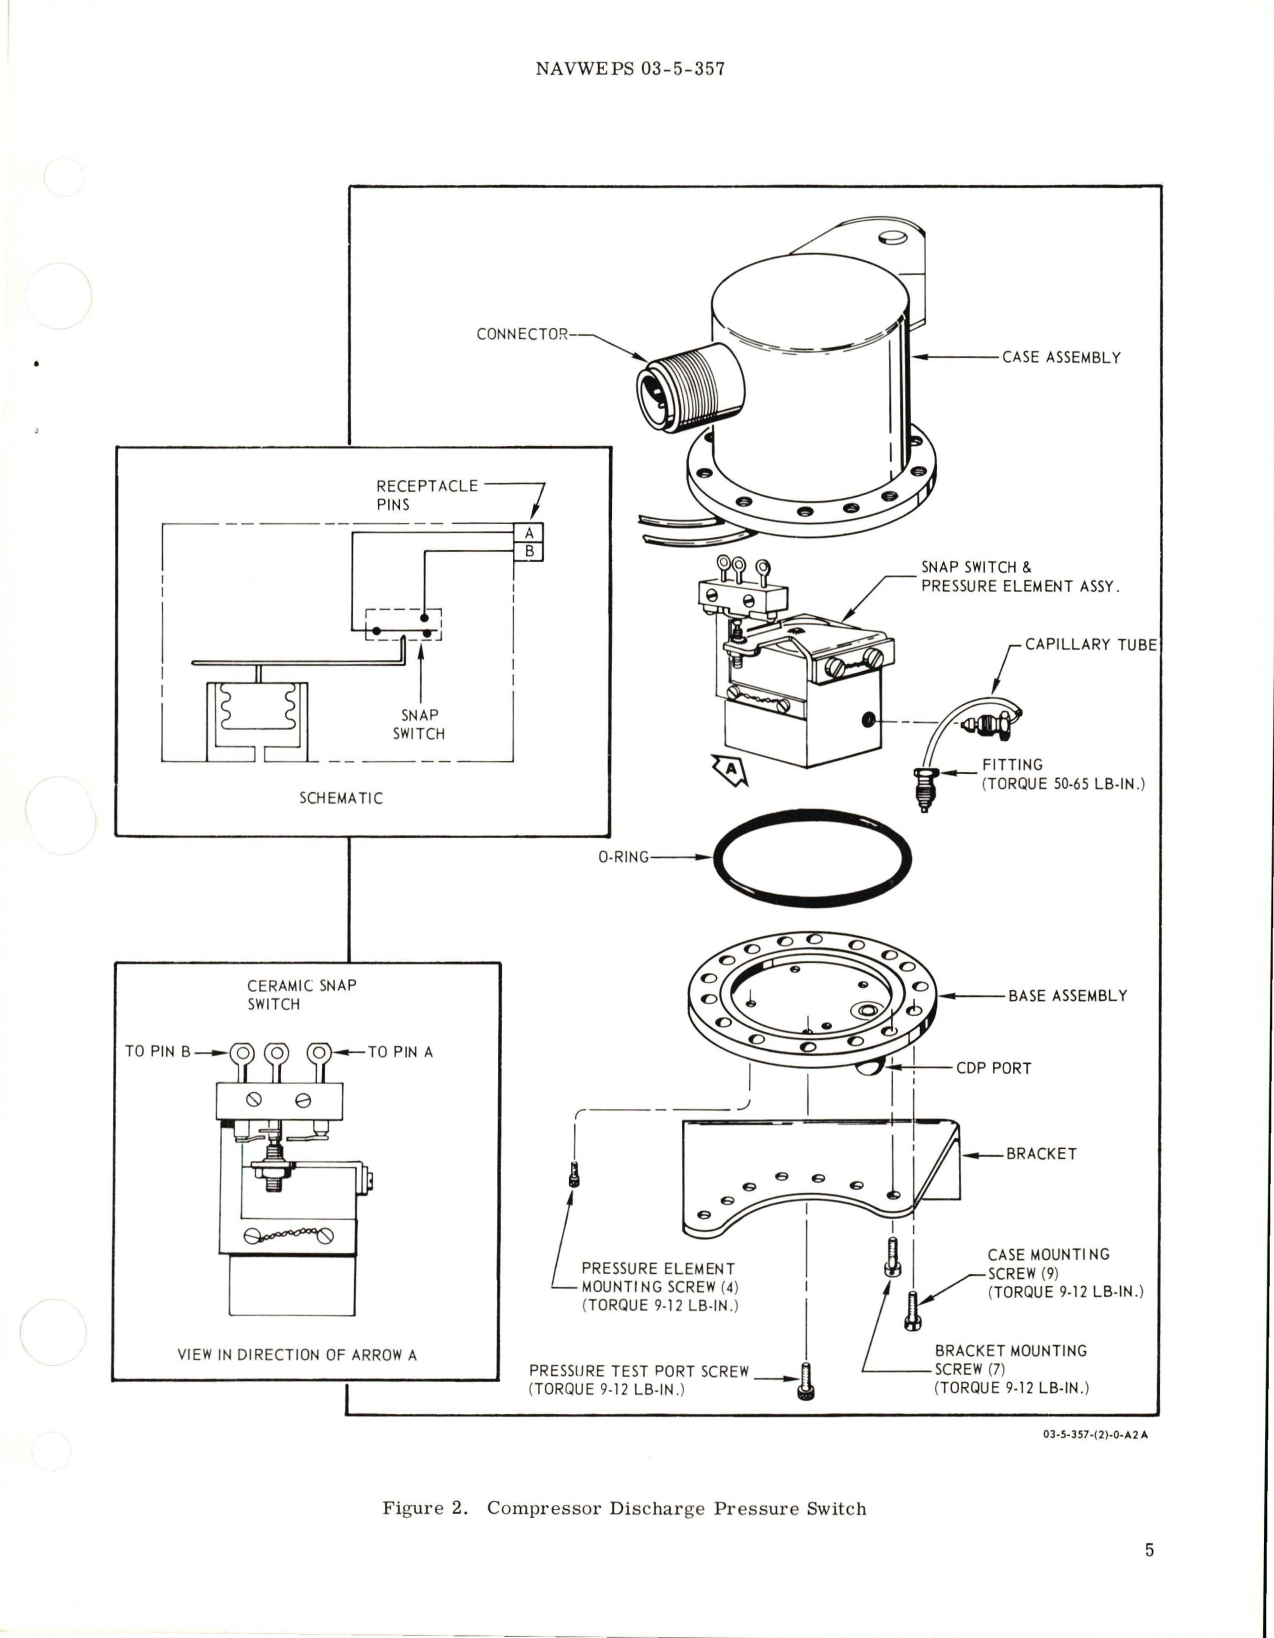 Sample page 5 from AirCorps Library document: Overhaul with Parts Breakdown for Compressor Discharge Pressure Switch - Model CG 124451 - Part 311D894P02